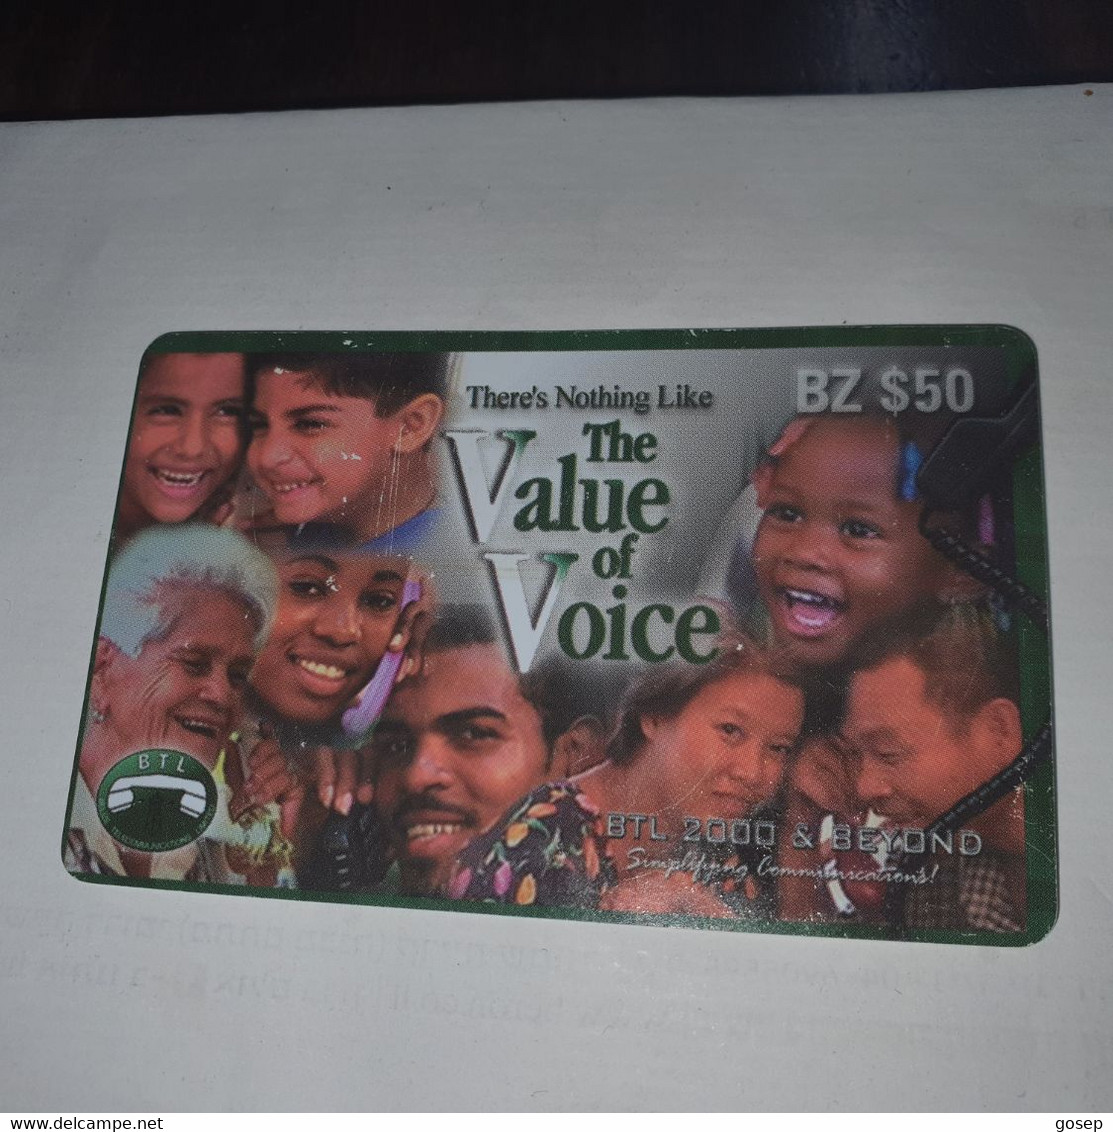 Belize-(BZ-DIG-PRE-?)-(18)-the Value Of Voice-(BZ-$50)-(487-256-5386)-used Card+1card Prepiad/gift Free - Belice